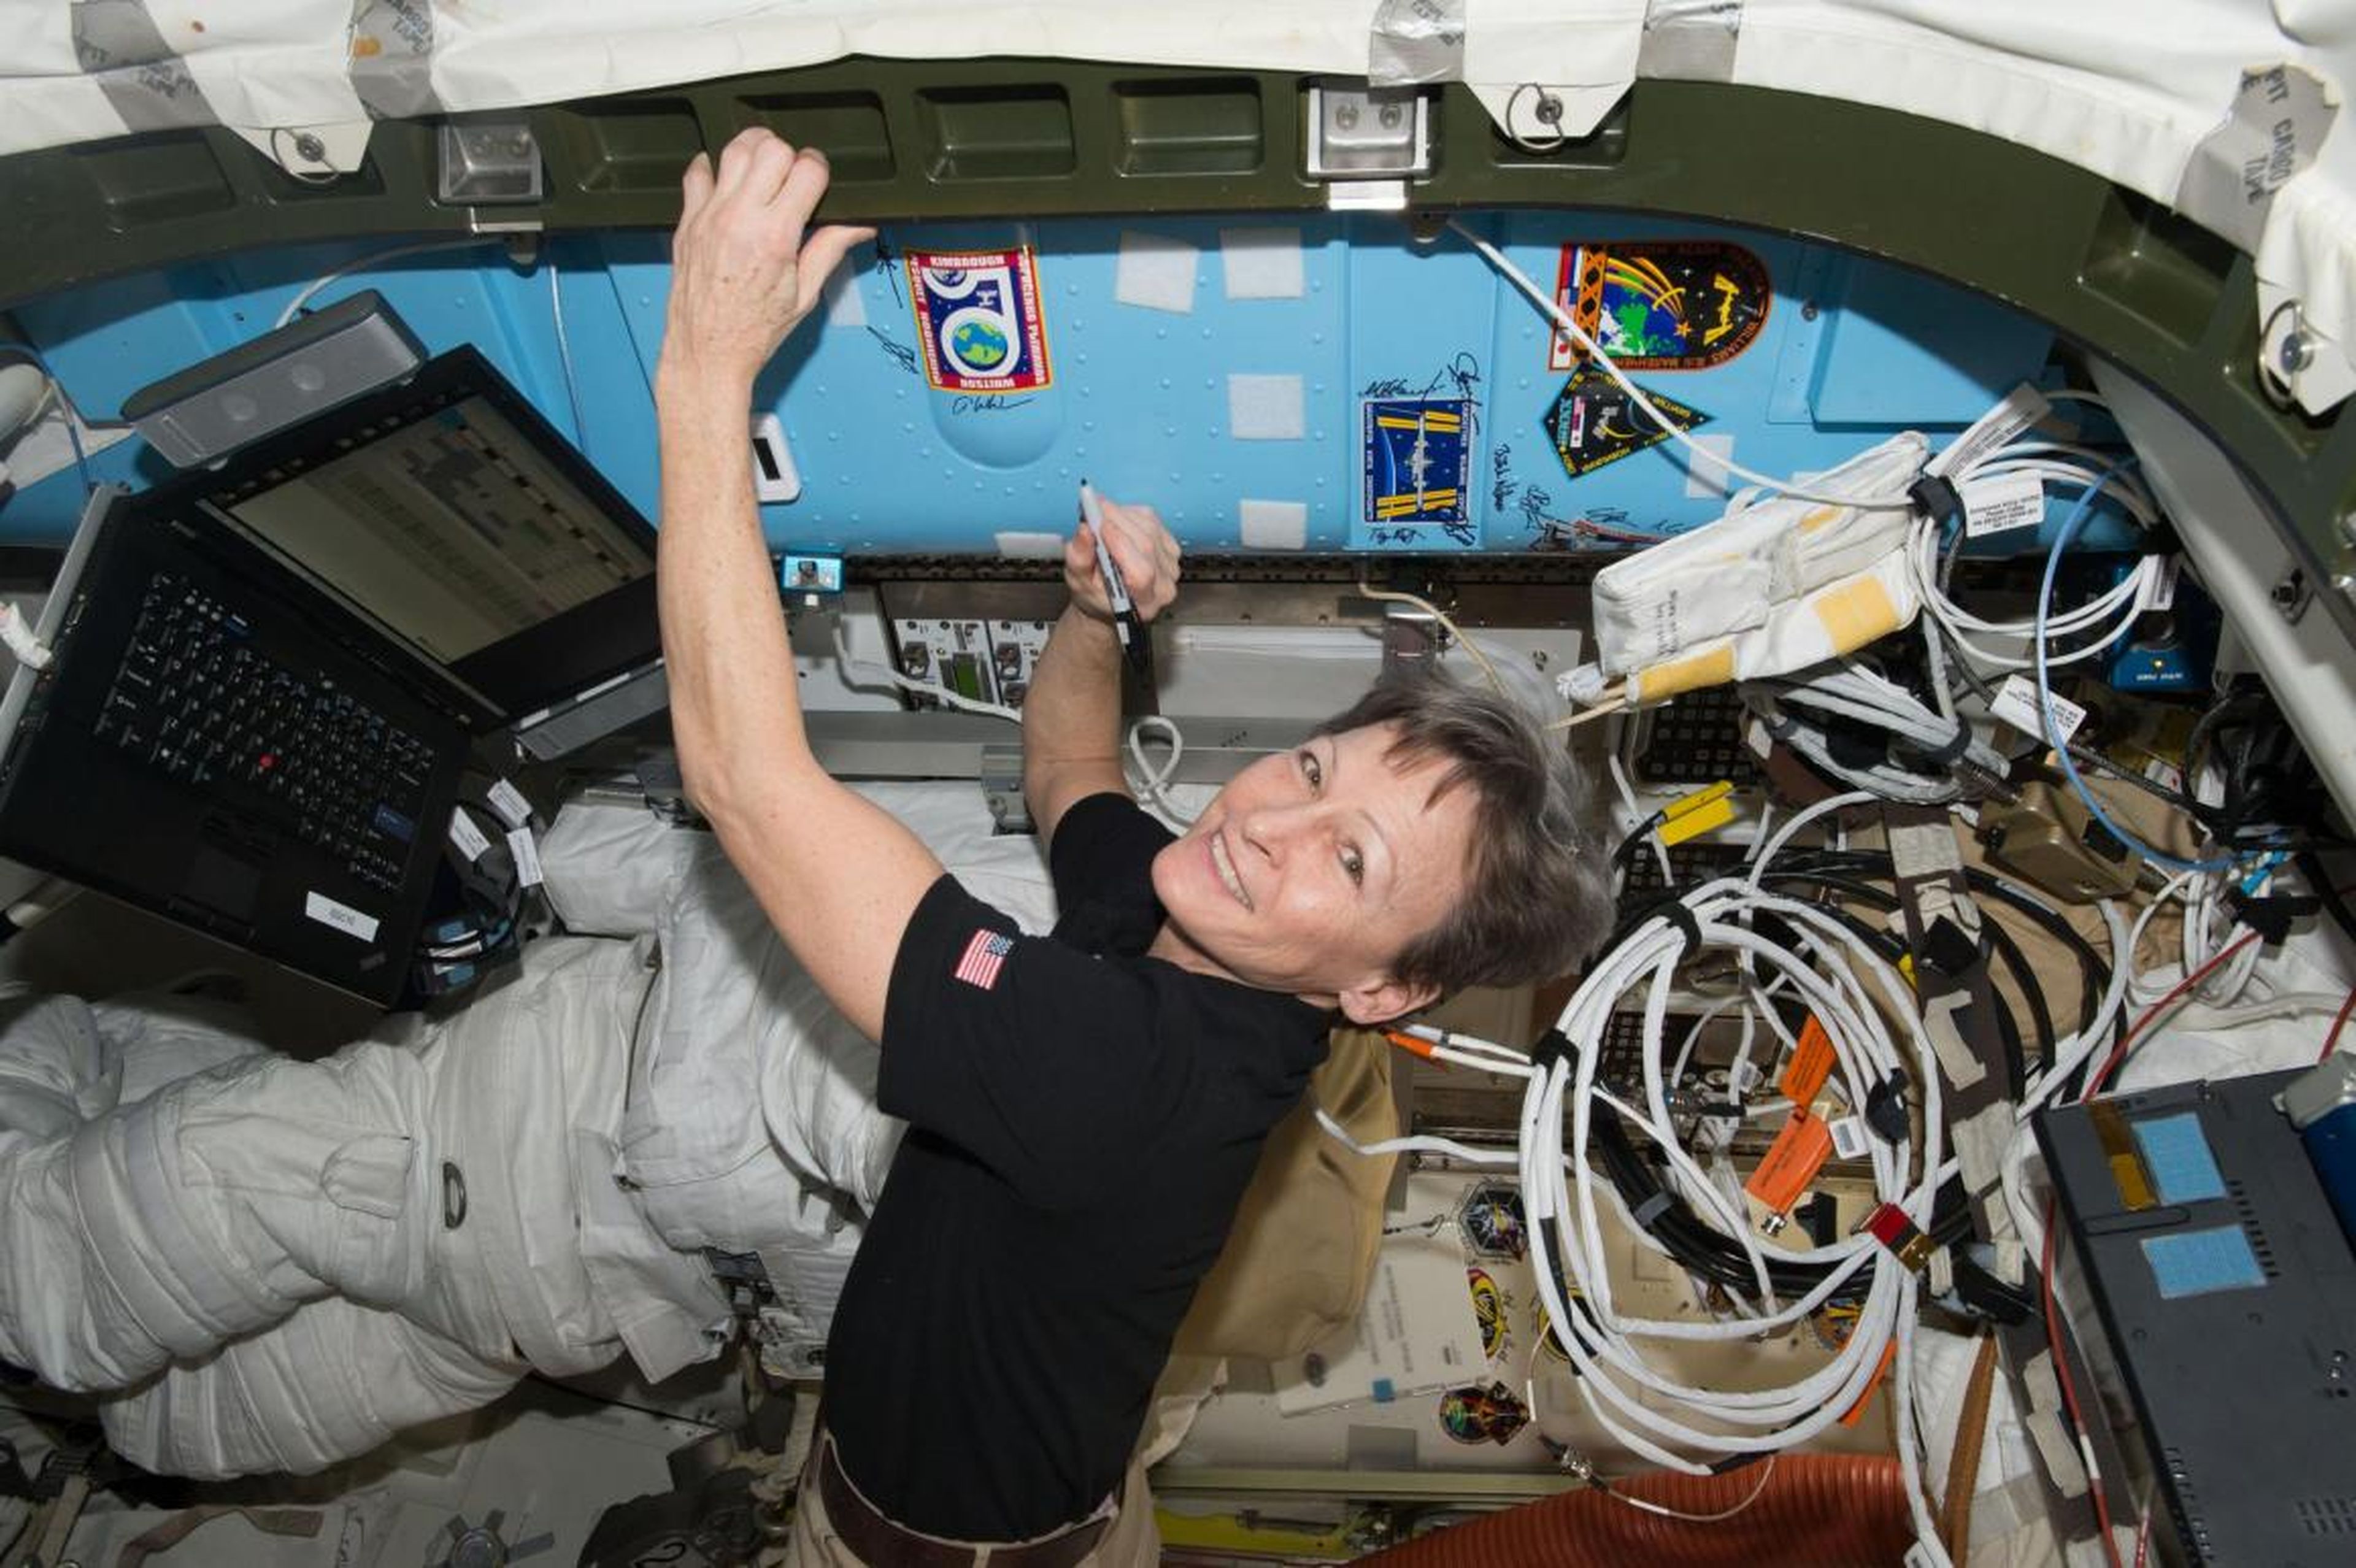 NASA astronaut Peggy Whitson signs a bulkhead on the International Space Station next to the Expedition 50 crew patch in 2017.